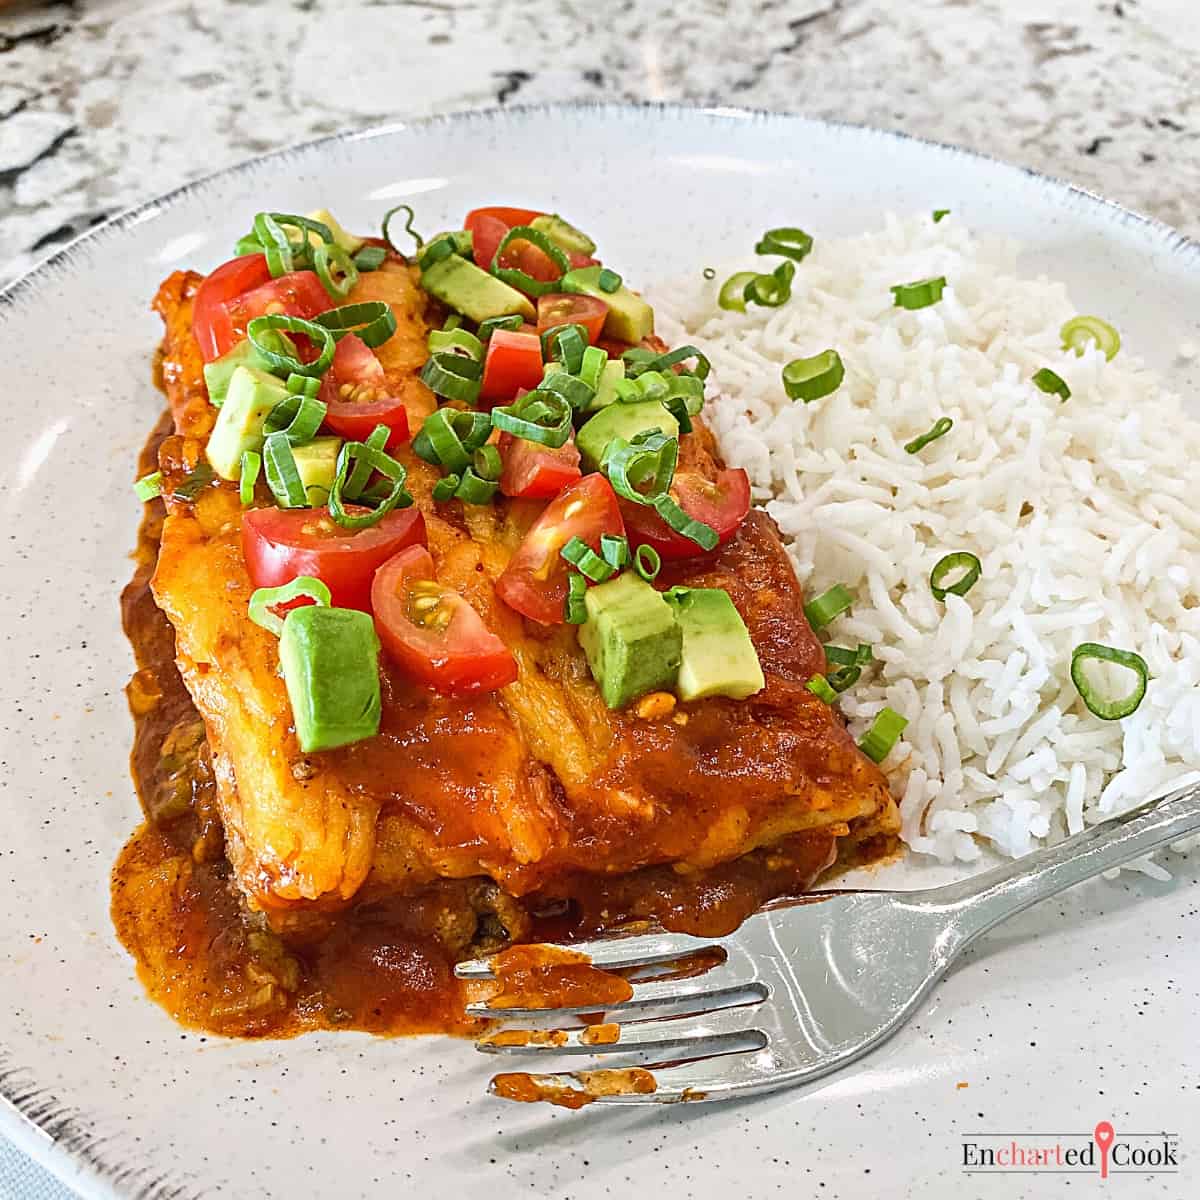 Enchiladas on a plate garnished with diced fresh tomatoes and avocado with a side of white rice.